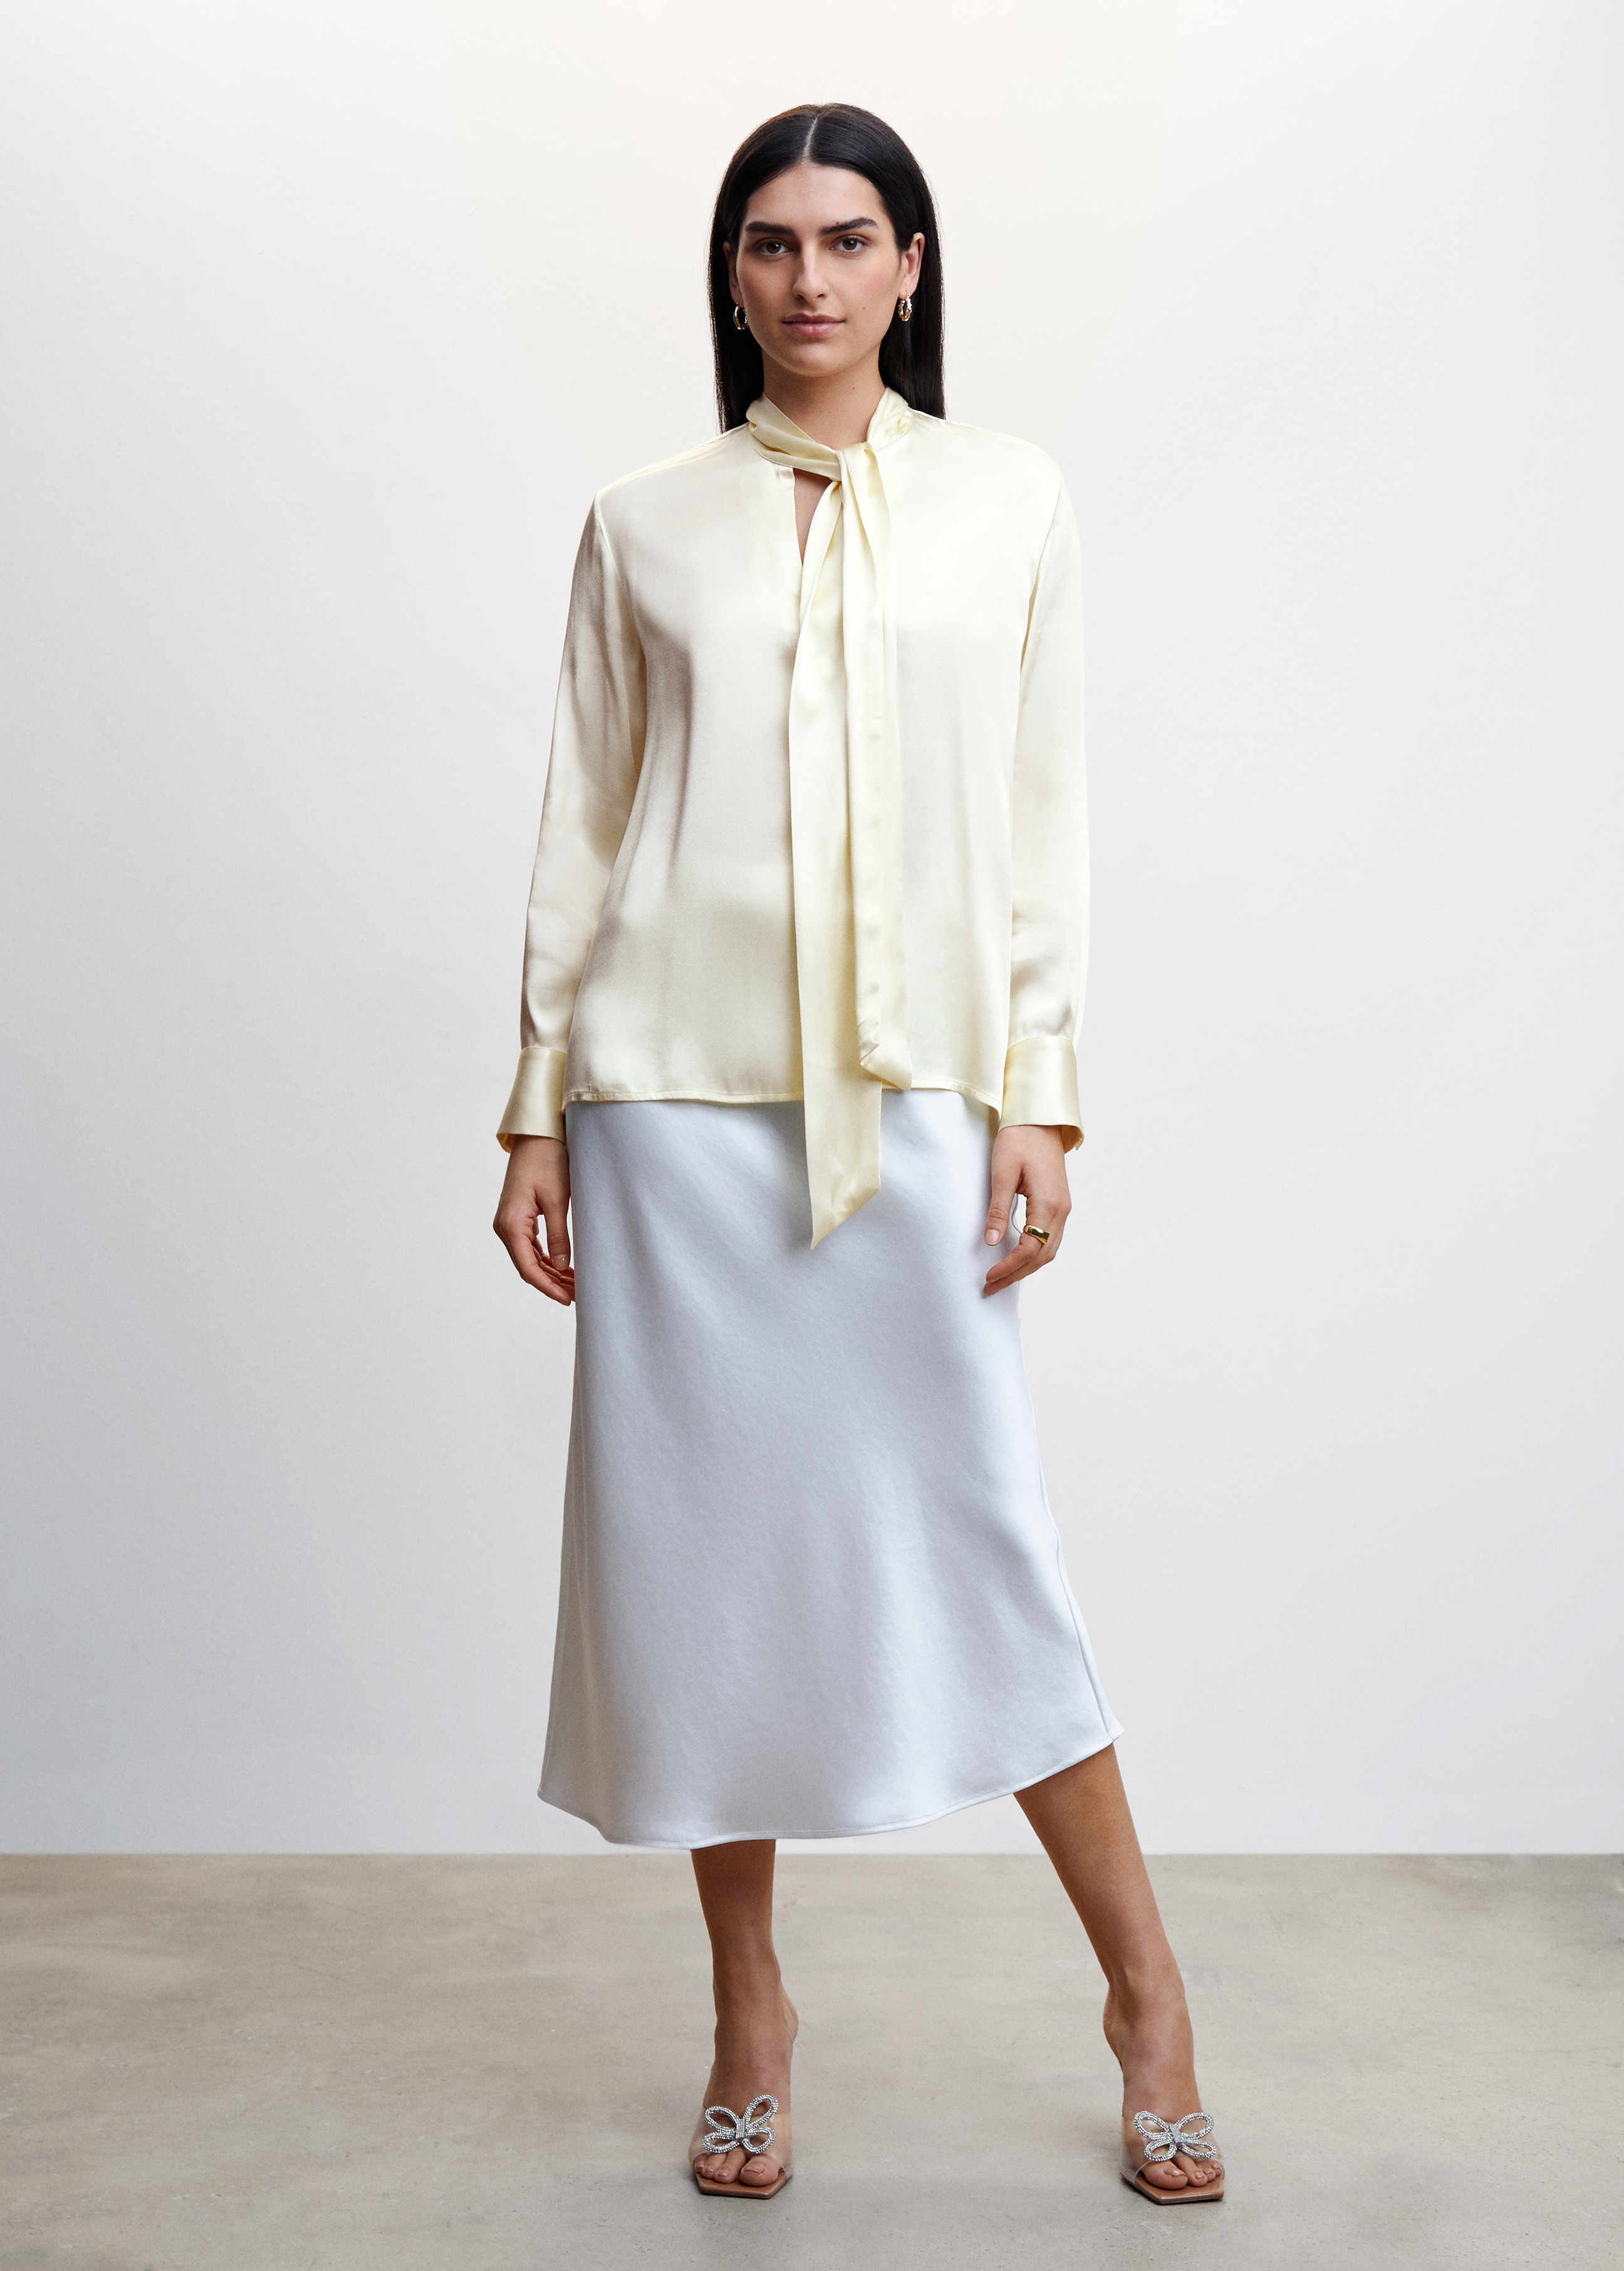 Satin blouse with bow collar - General plane